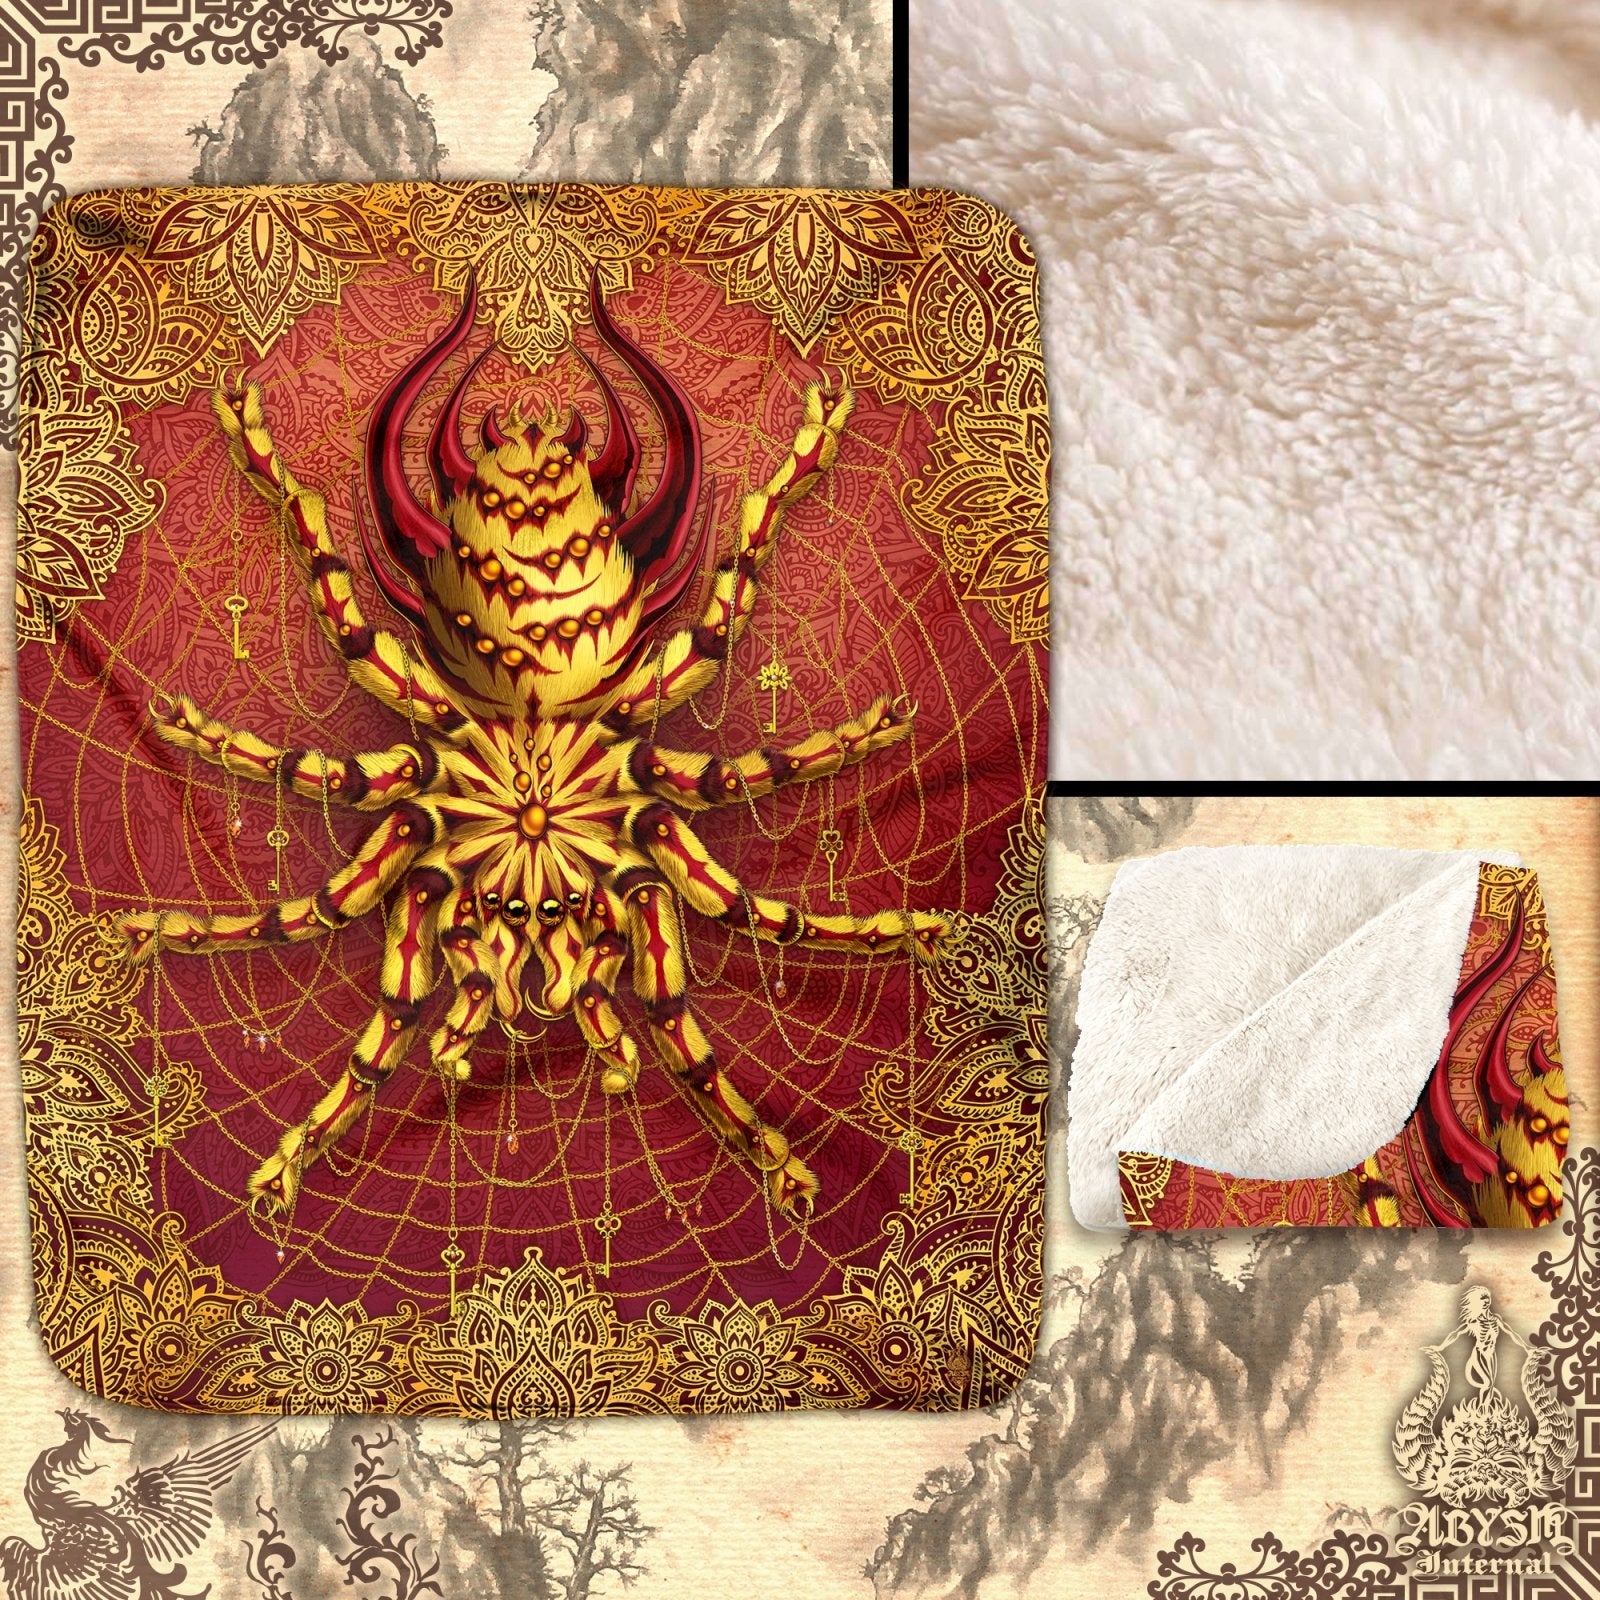 Boho Throw Fleece Blanket, Indie Home Decor, Unique Gift, Eclectic and Funky Gift - Spider, Tarantula Art - Abysm Internal